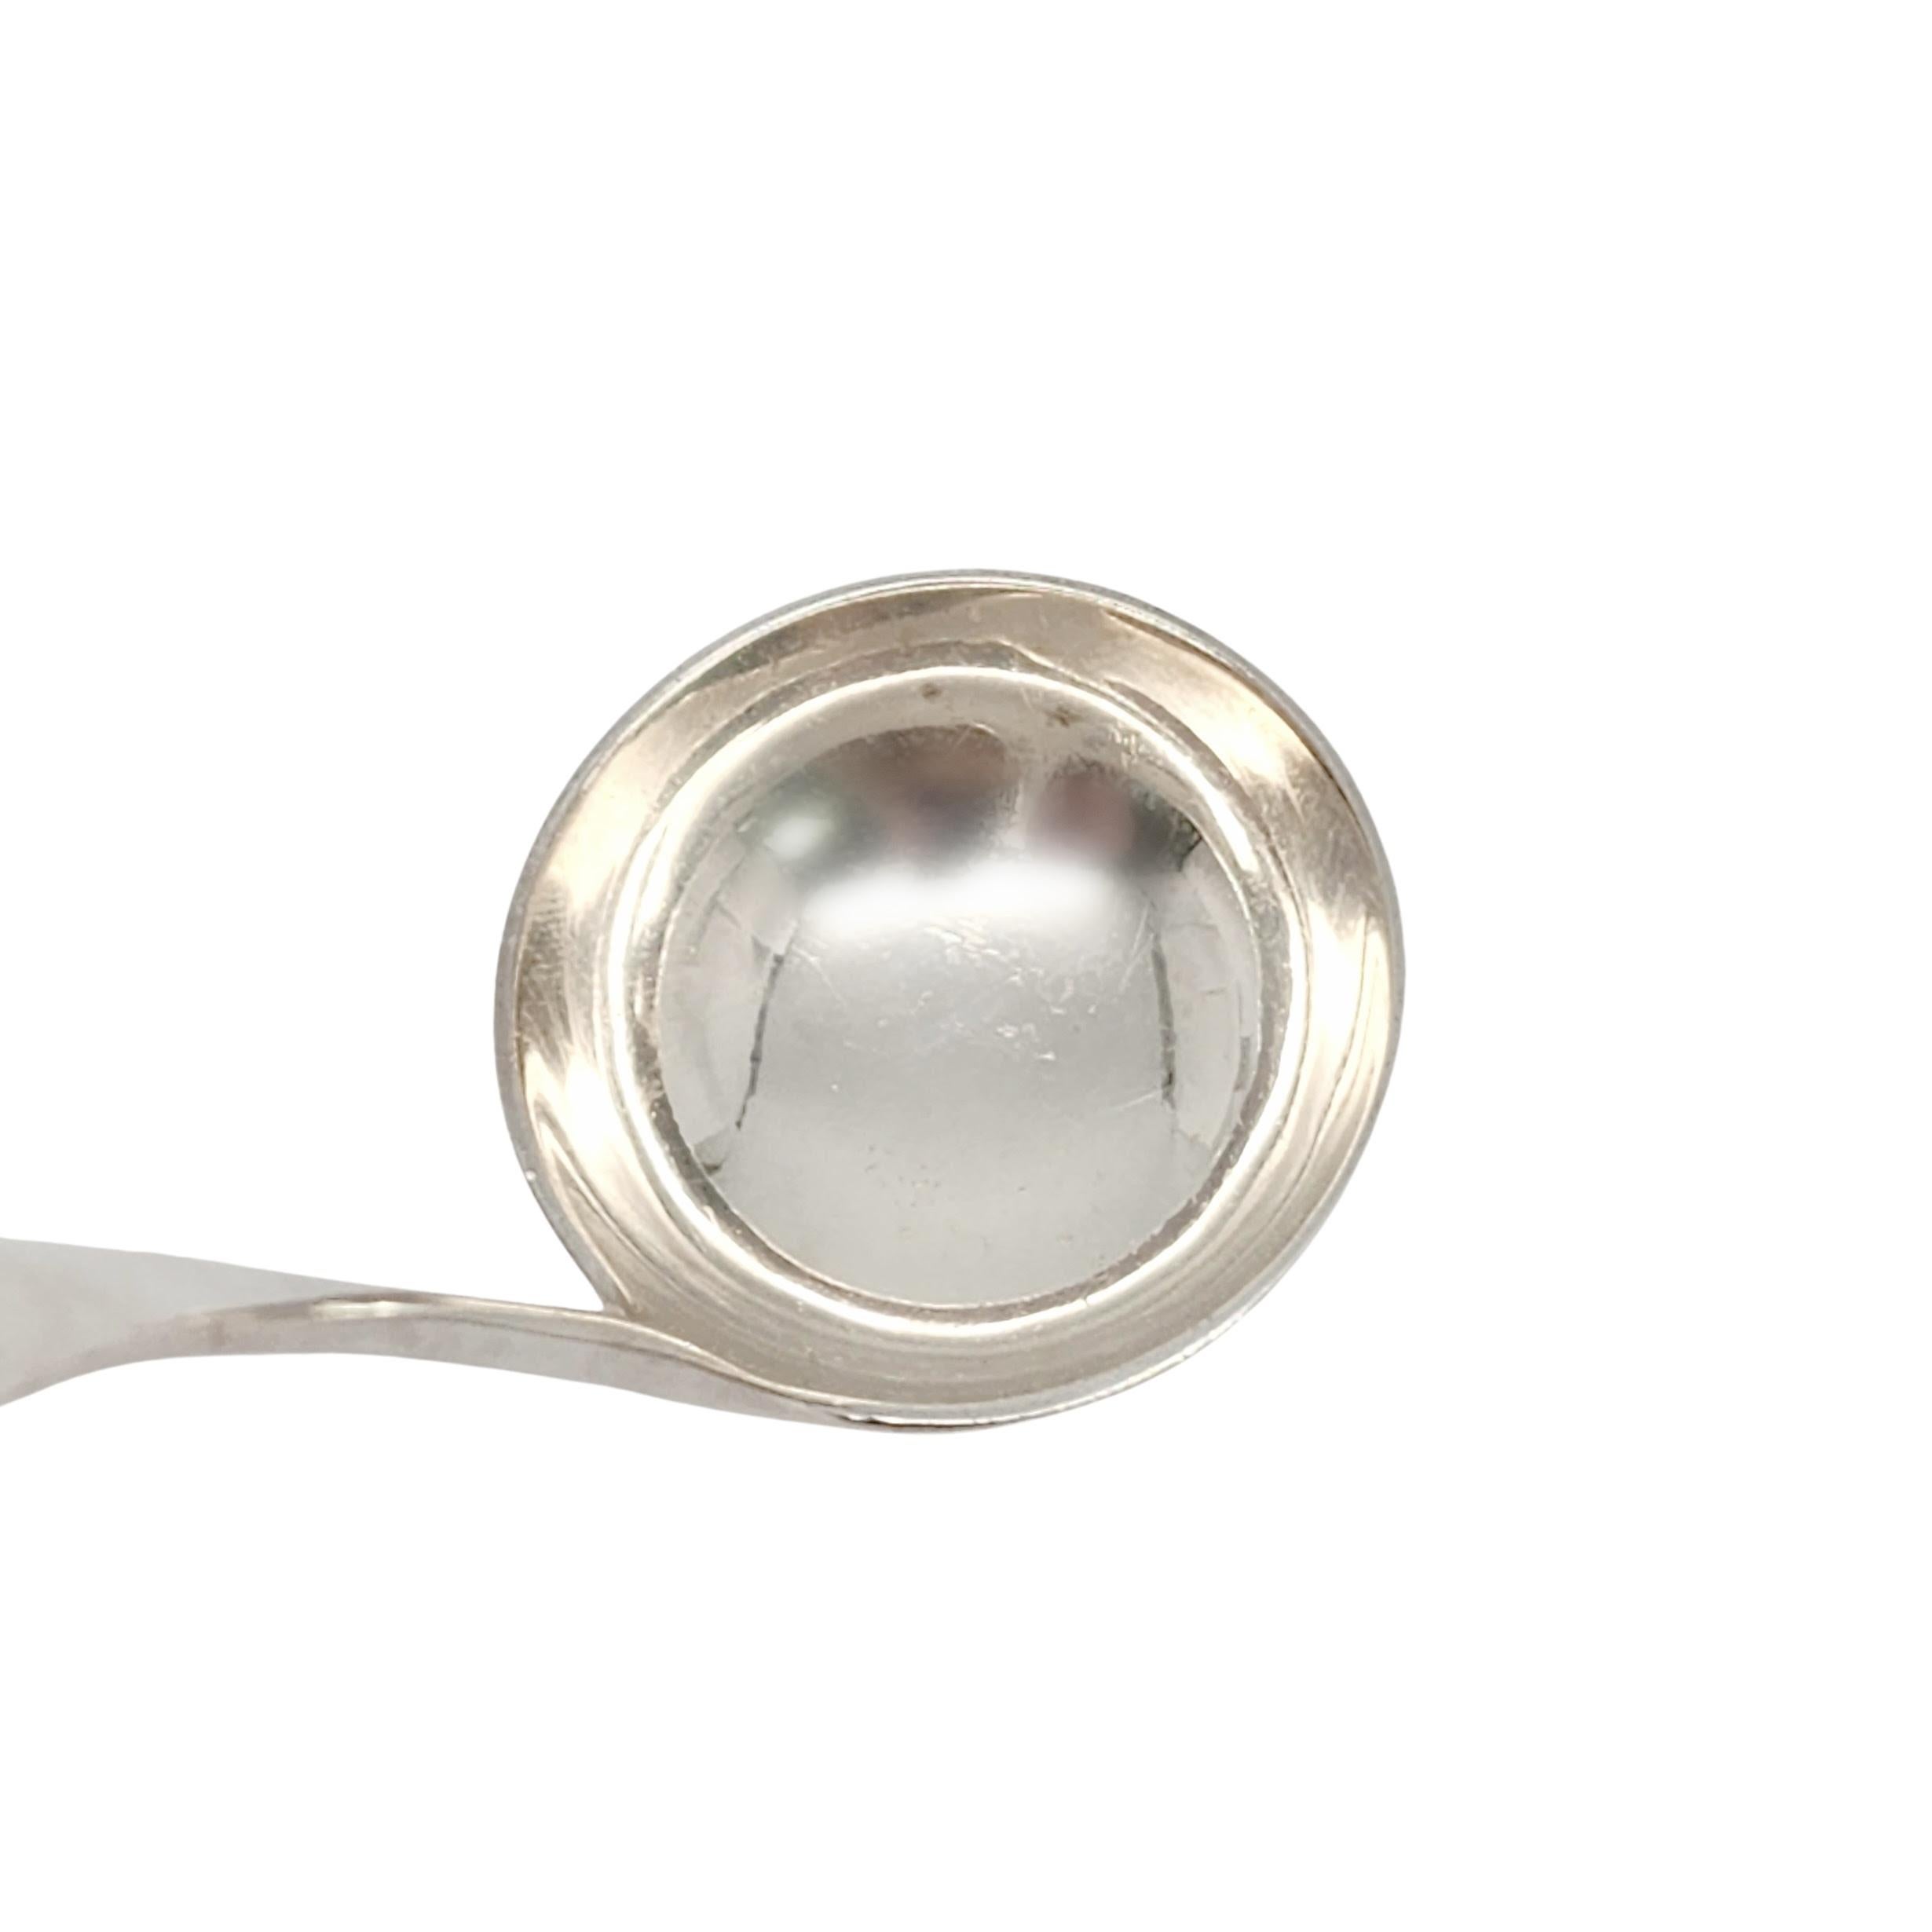 Tiffany & Co Sterling Silver Reproduction Edinborourgh Ladle (B) #13641 For Sale 1